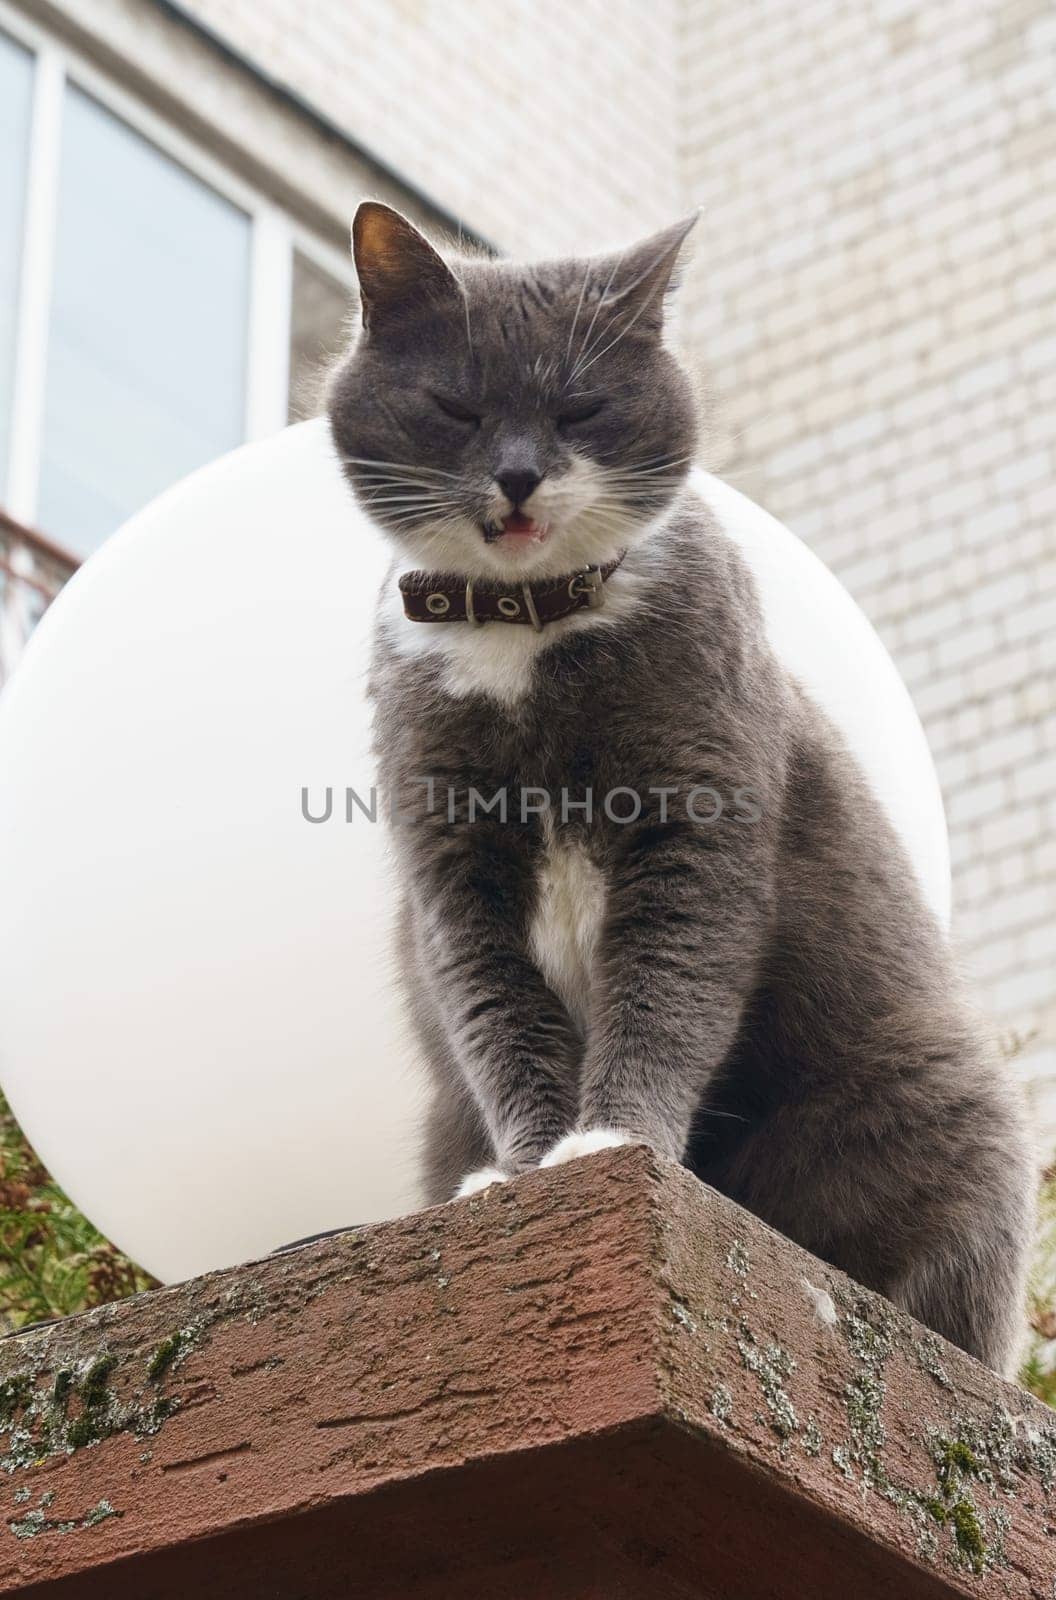 A gray-white cat sits on a fence near a lantern and looks down with wary eyes. The cat feels comfortable at a high vantage point, observing the surroundings below. Vertical frame